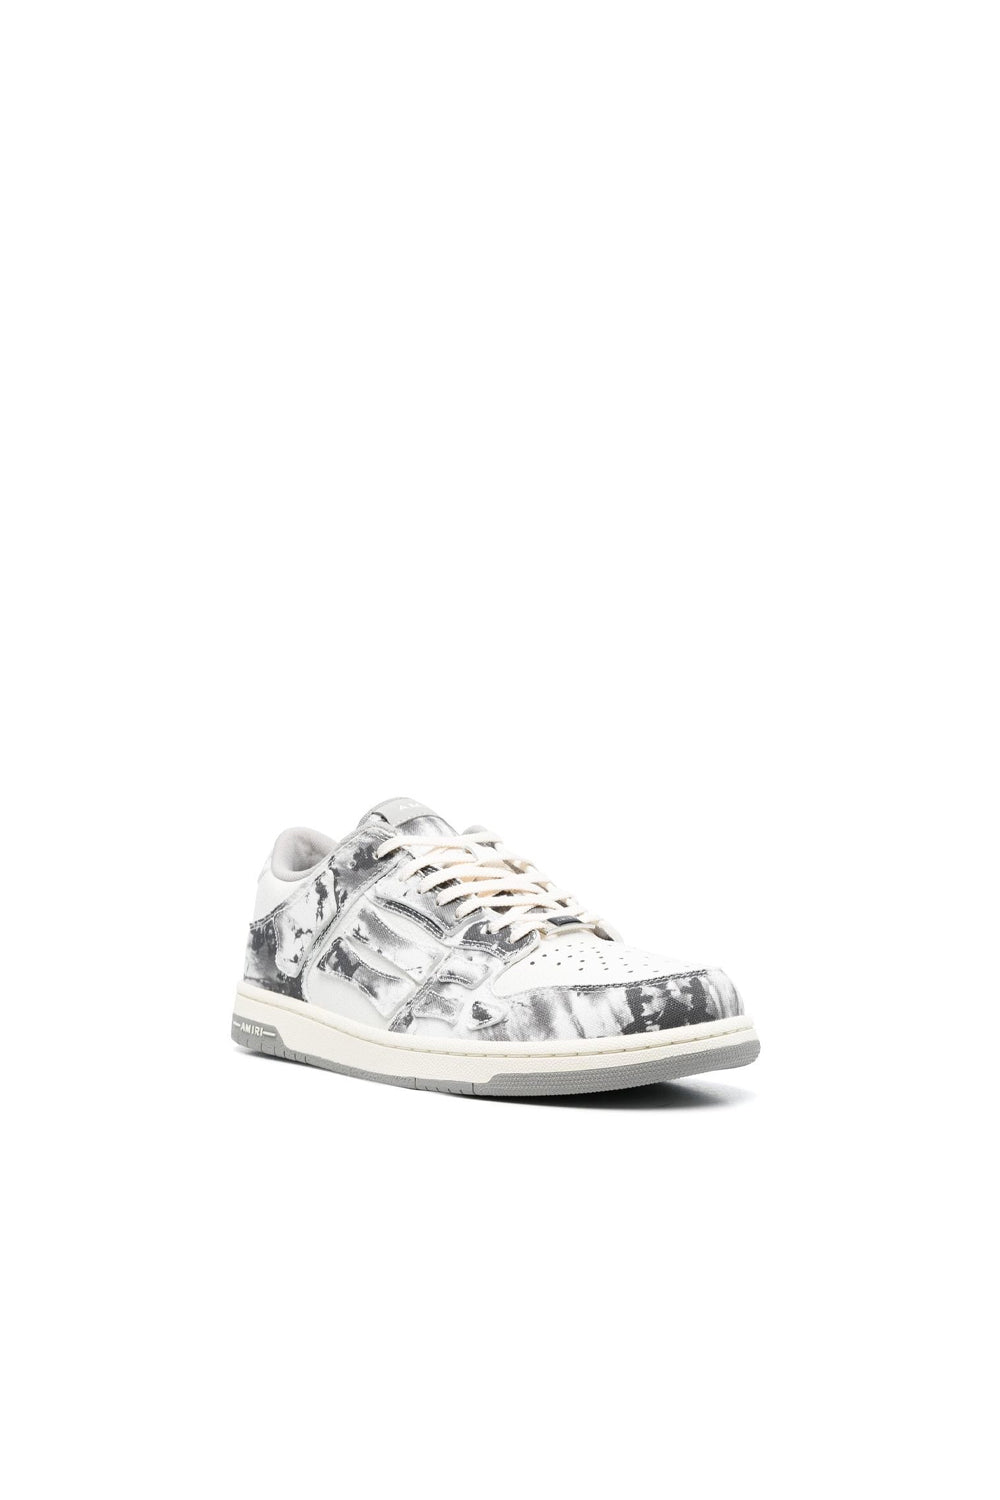 AMIRI abstract-print low-top sneakers